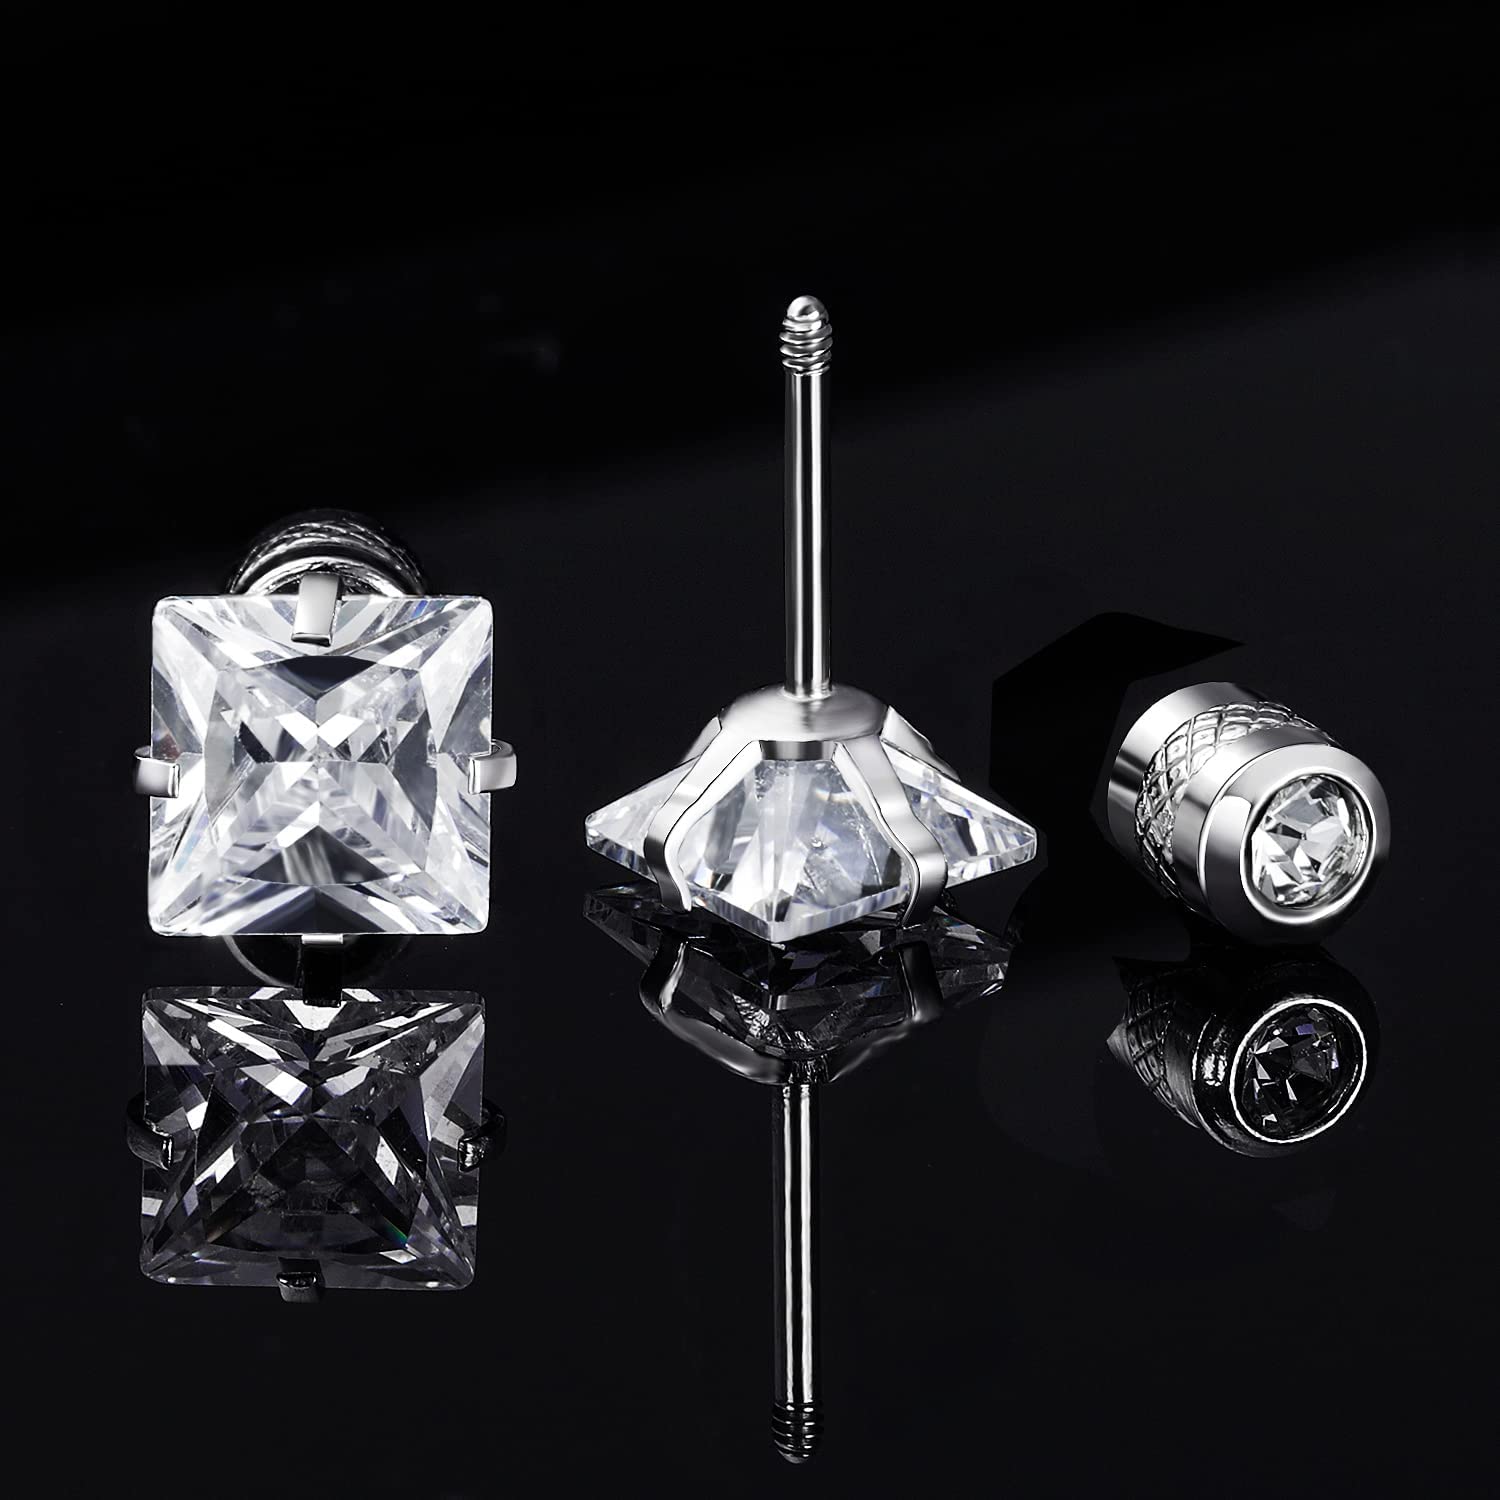 Pack of Titanium Colorful CZ Screw Back Earrings Hypoallergenic for Sensitive Ears